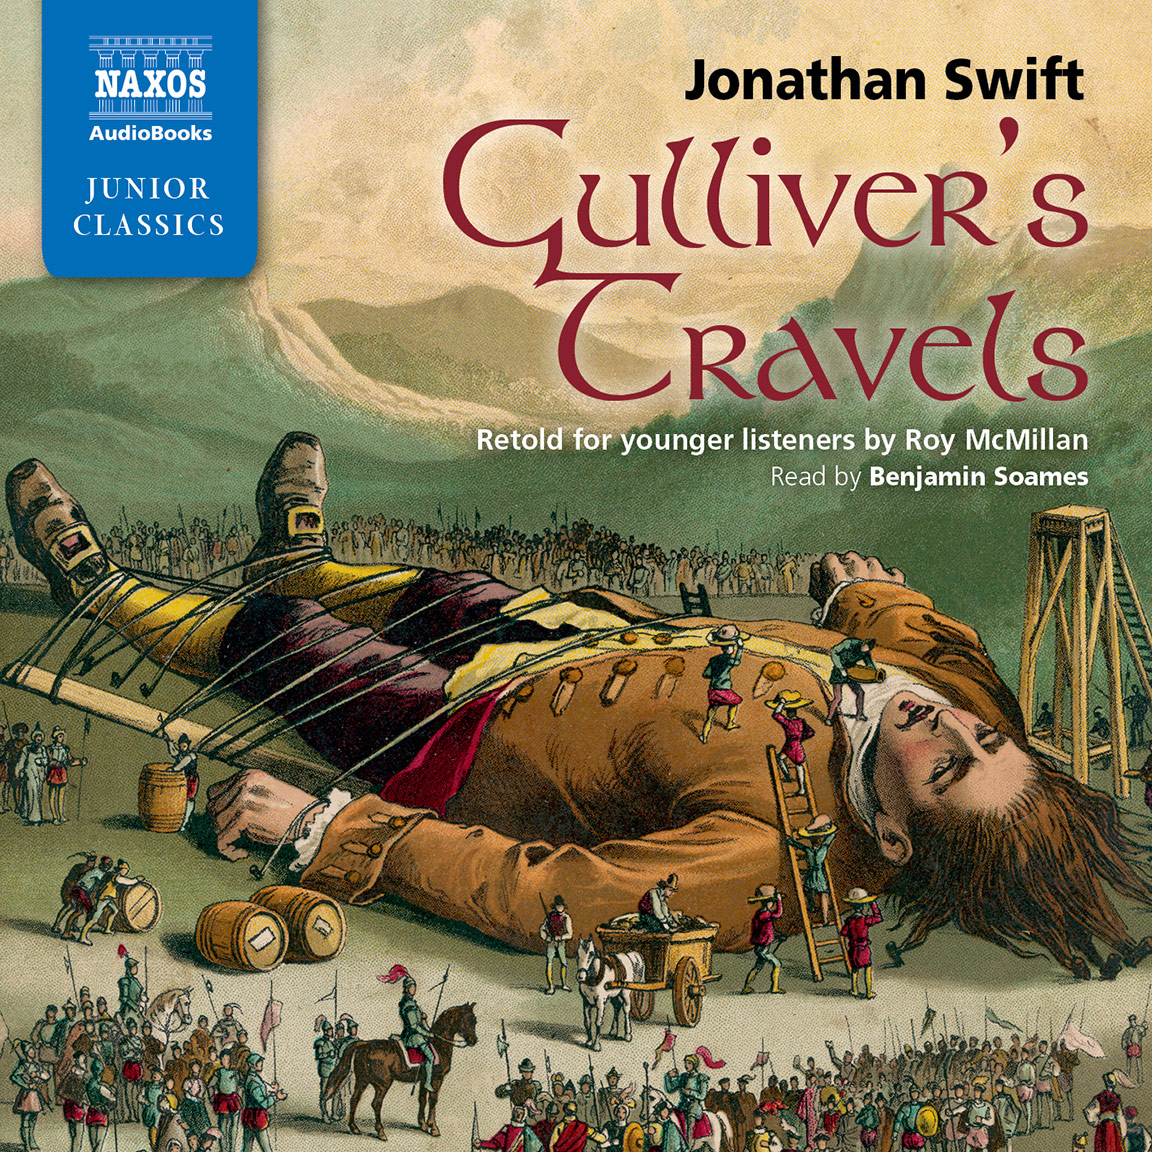 Gulliverâ€™s Travels: Retold for younger listeners (abridged) â€“ Naxos ...